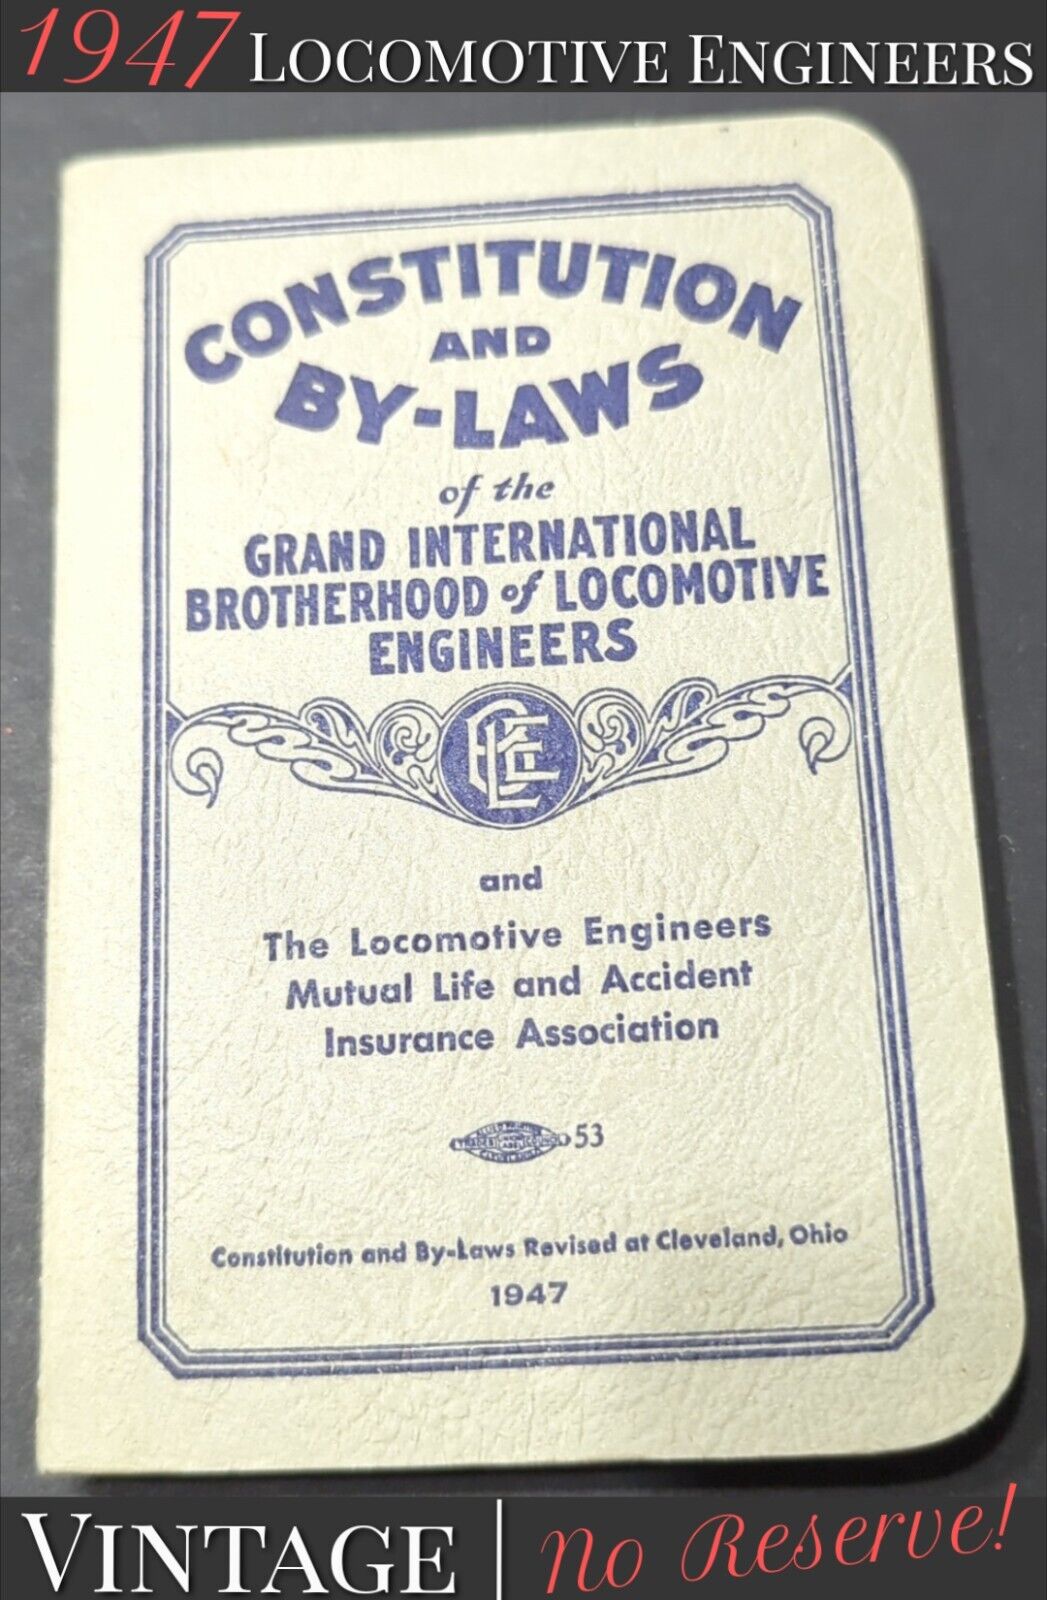 ✨VINTAGE✨ 1947 BROTHERHOOD OF LOCOMOTIVE ENGINEERS CONSTITUTION AND BY-LAWS